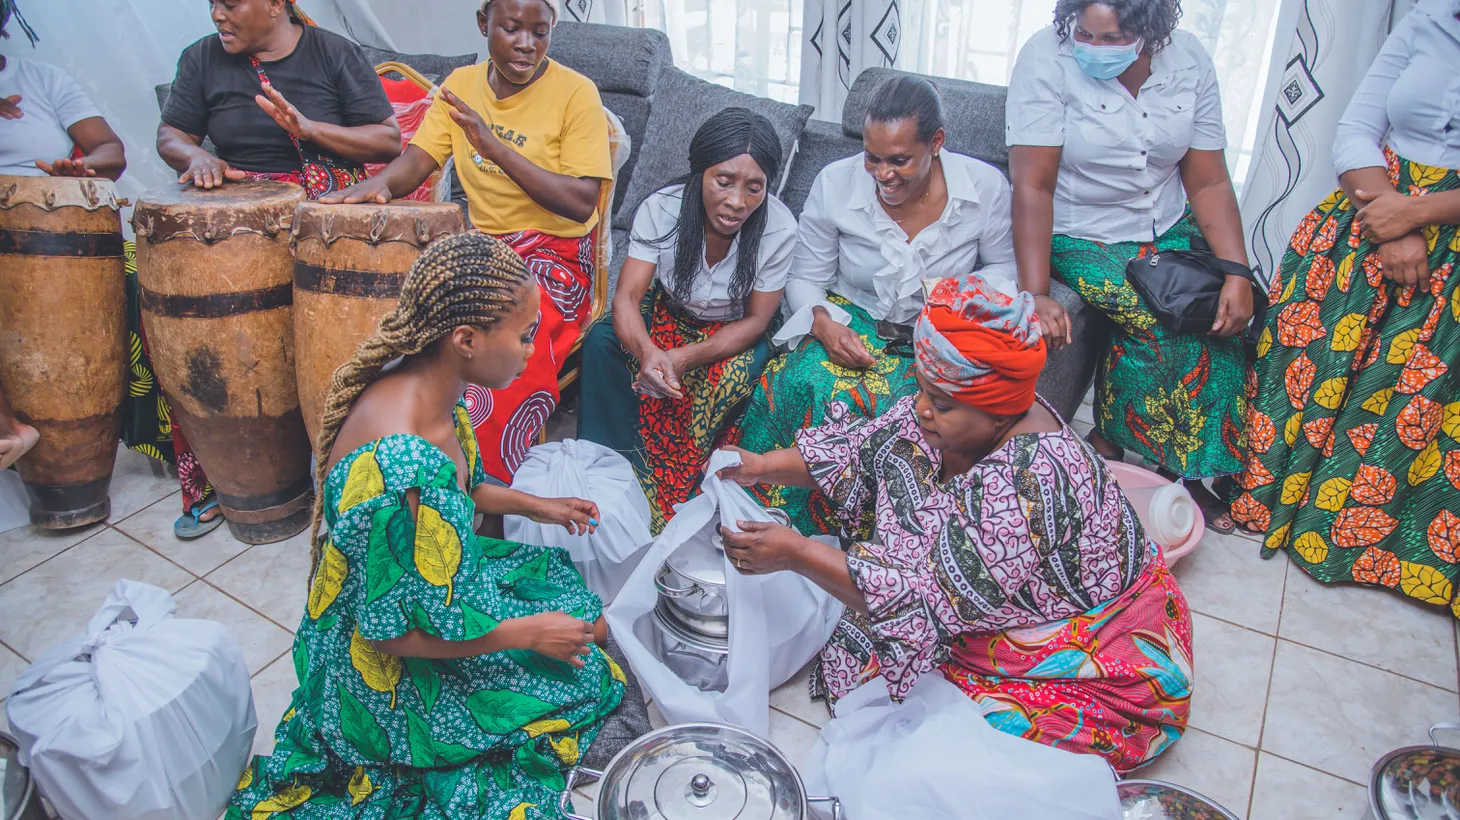 Travel writer Mazuba Kapambwe-Mizzi prepares a special meal for the groom as part of the Zambian wedding tradition known as ichilanga mulilo.